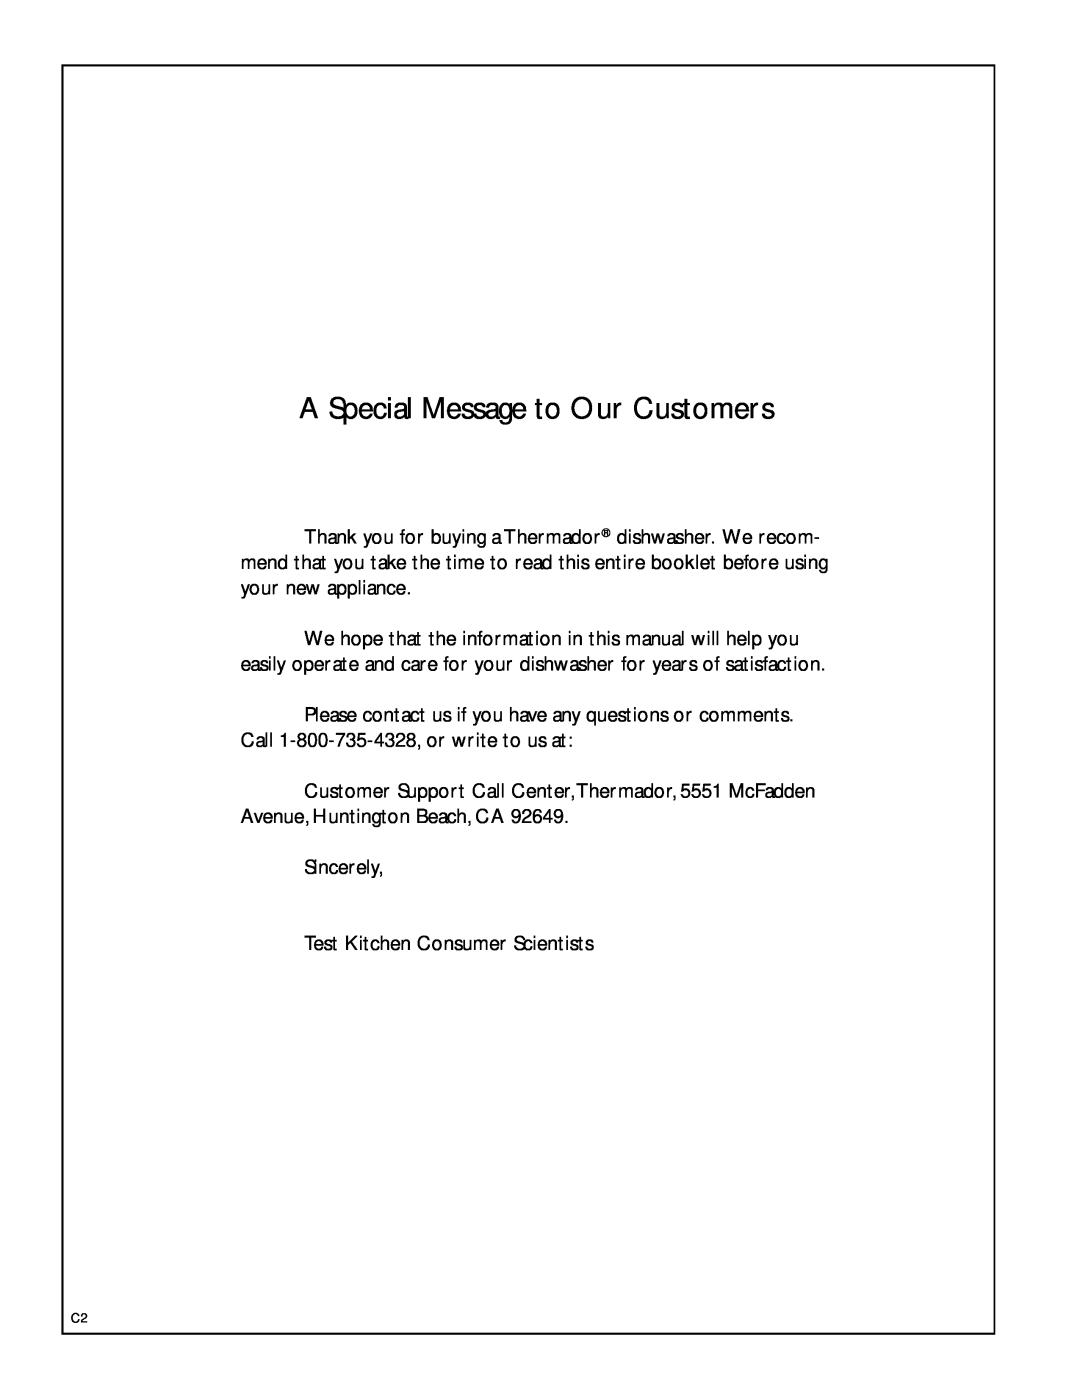 Thermador DW244UB, DWI246UW, DW246UW, DW245UW DW246UB, DW244UW DW245UB manual A Special Message to Our Customers 